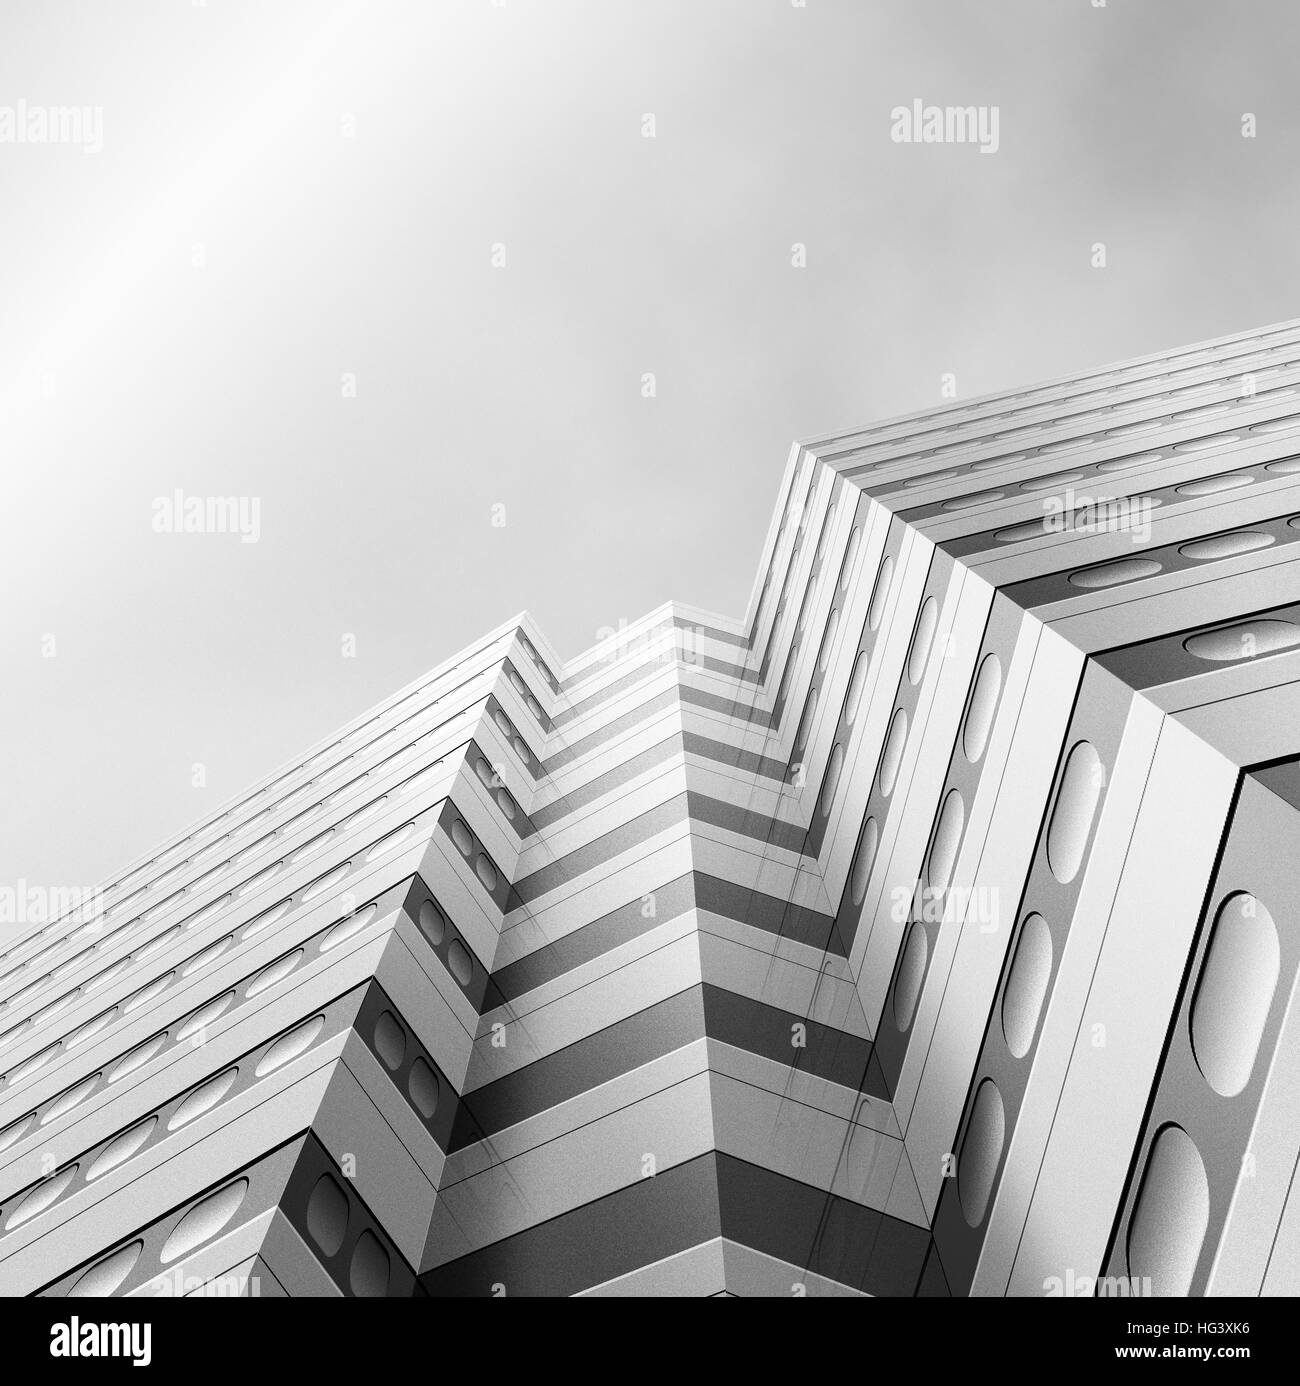 Directly Below Shot Of Modern Skyscraper Against Cloudy Sky. Illustration. Stock Photo